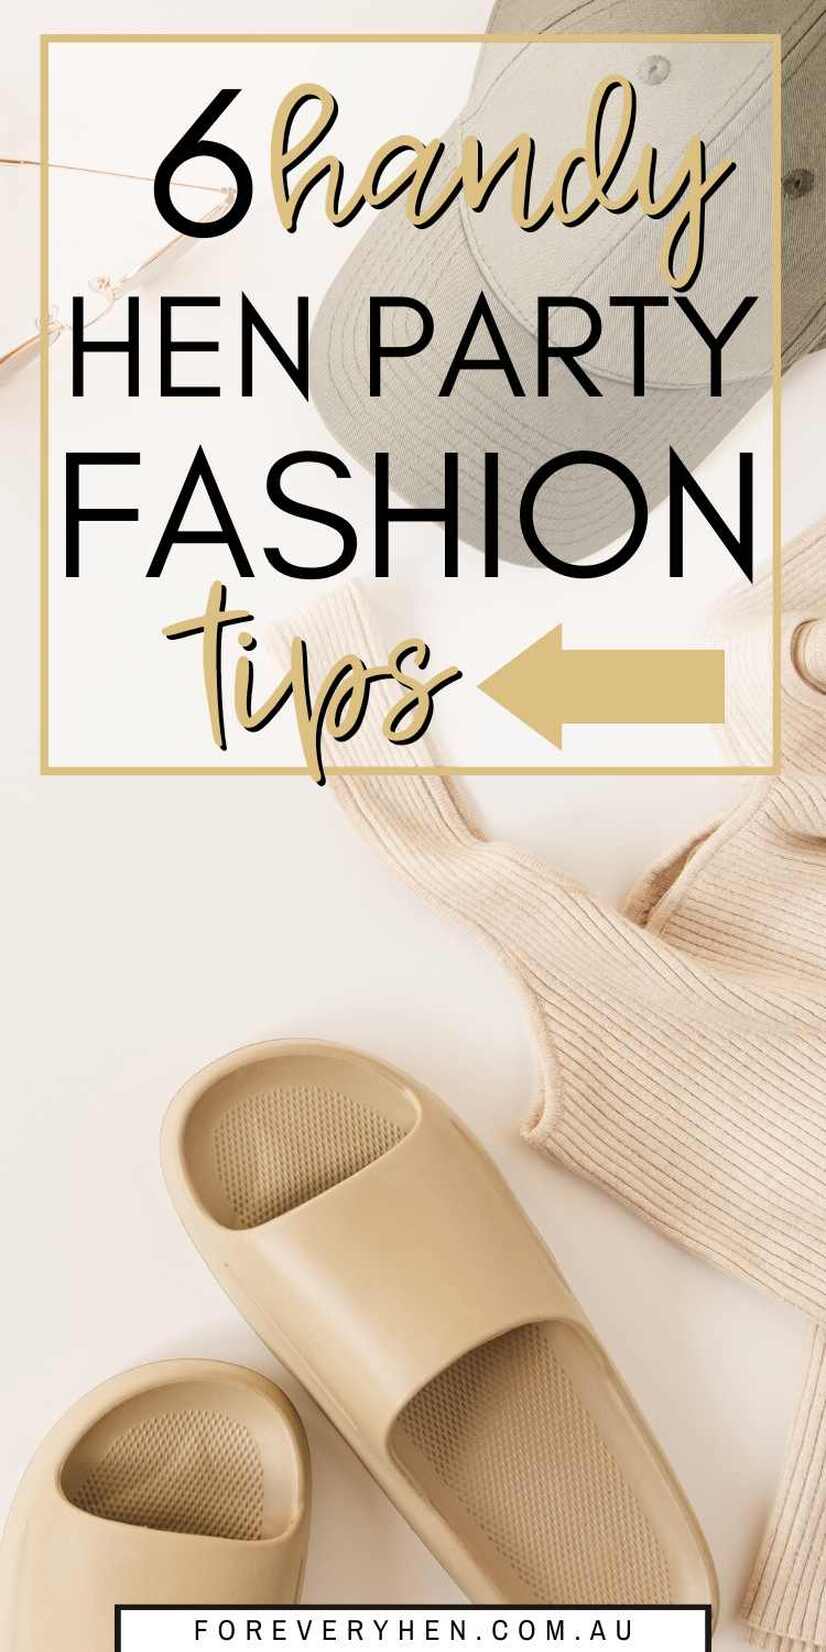 Flat lay clothing items - a hat, sunglasses, shoes and top. Text overlay: 6 handy hen party fashion tips